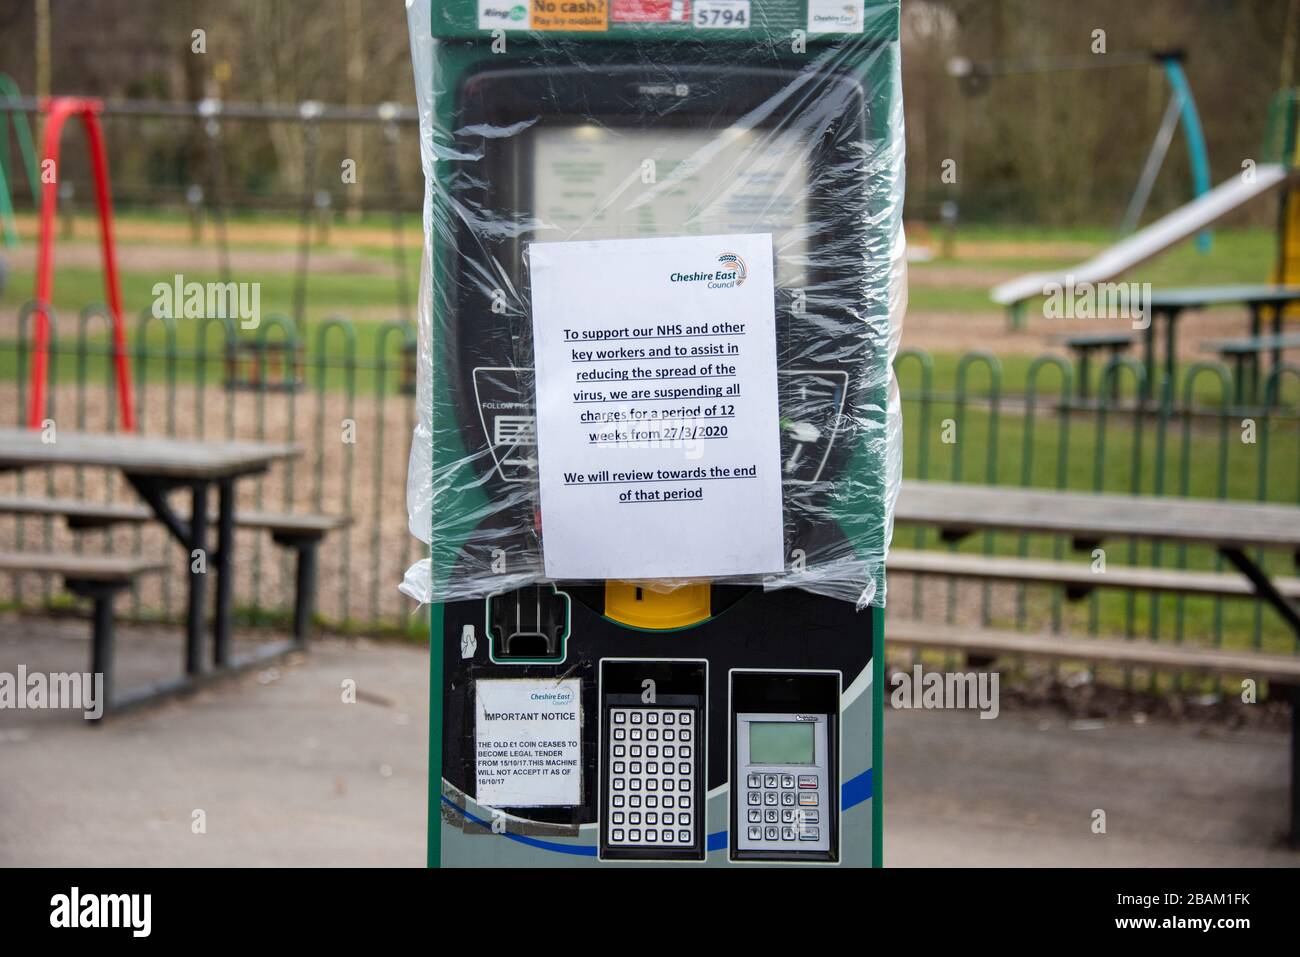 Parking meter in public park in Wilmslow, Cheshire, UK due to Coronavirus lock down on 29.03.20 to aim to reduce the spread of COVID-19 Stock Photo